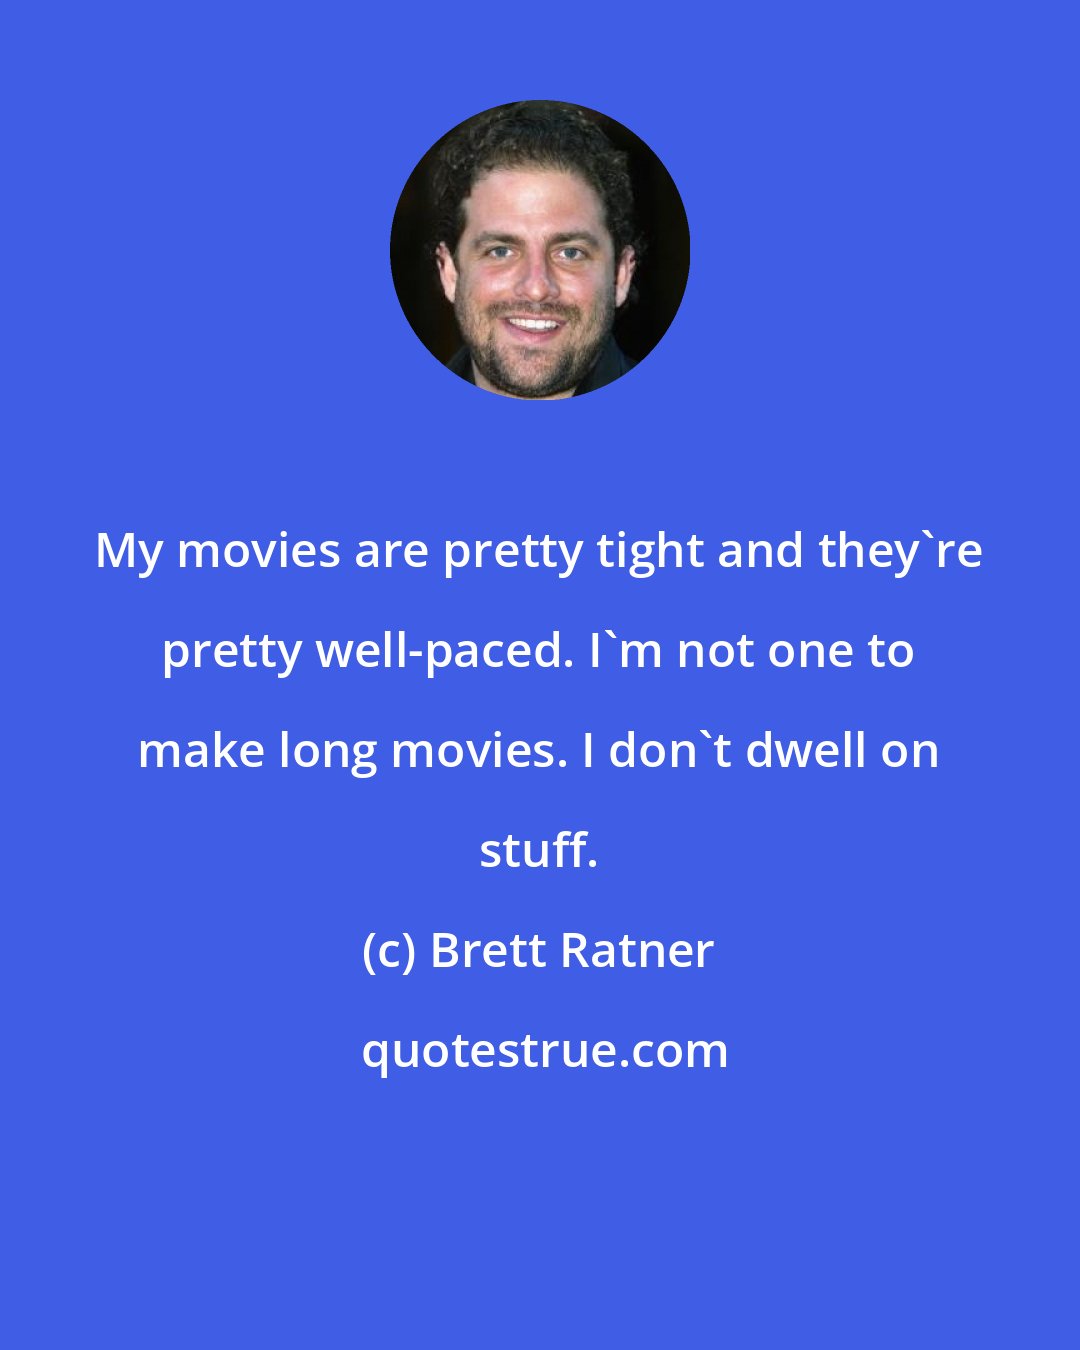 Brett Ratner: My movies are pretty tight and they're pretty well-paced. I'm not one to make long movies. I don't dwell on stuff.